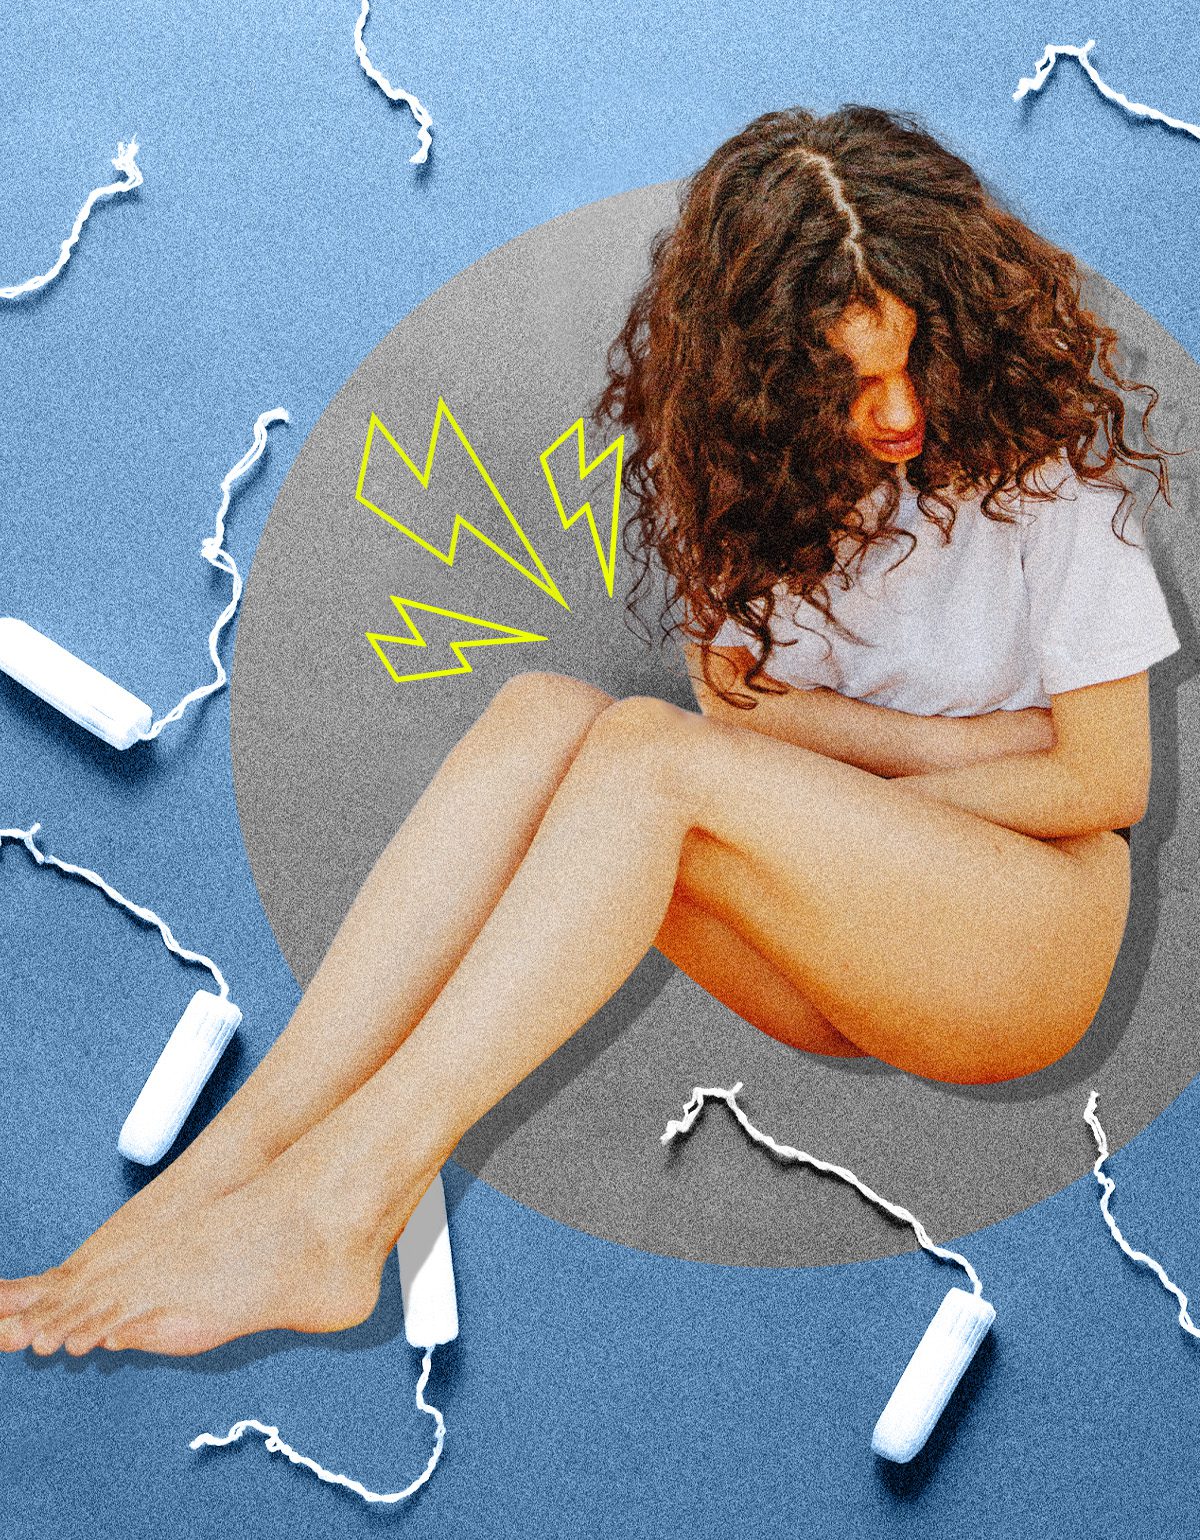 Do tampons make period cramps worse?